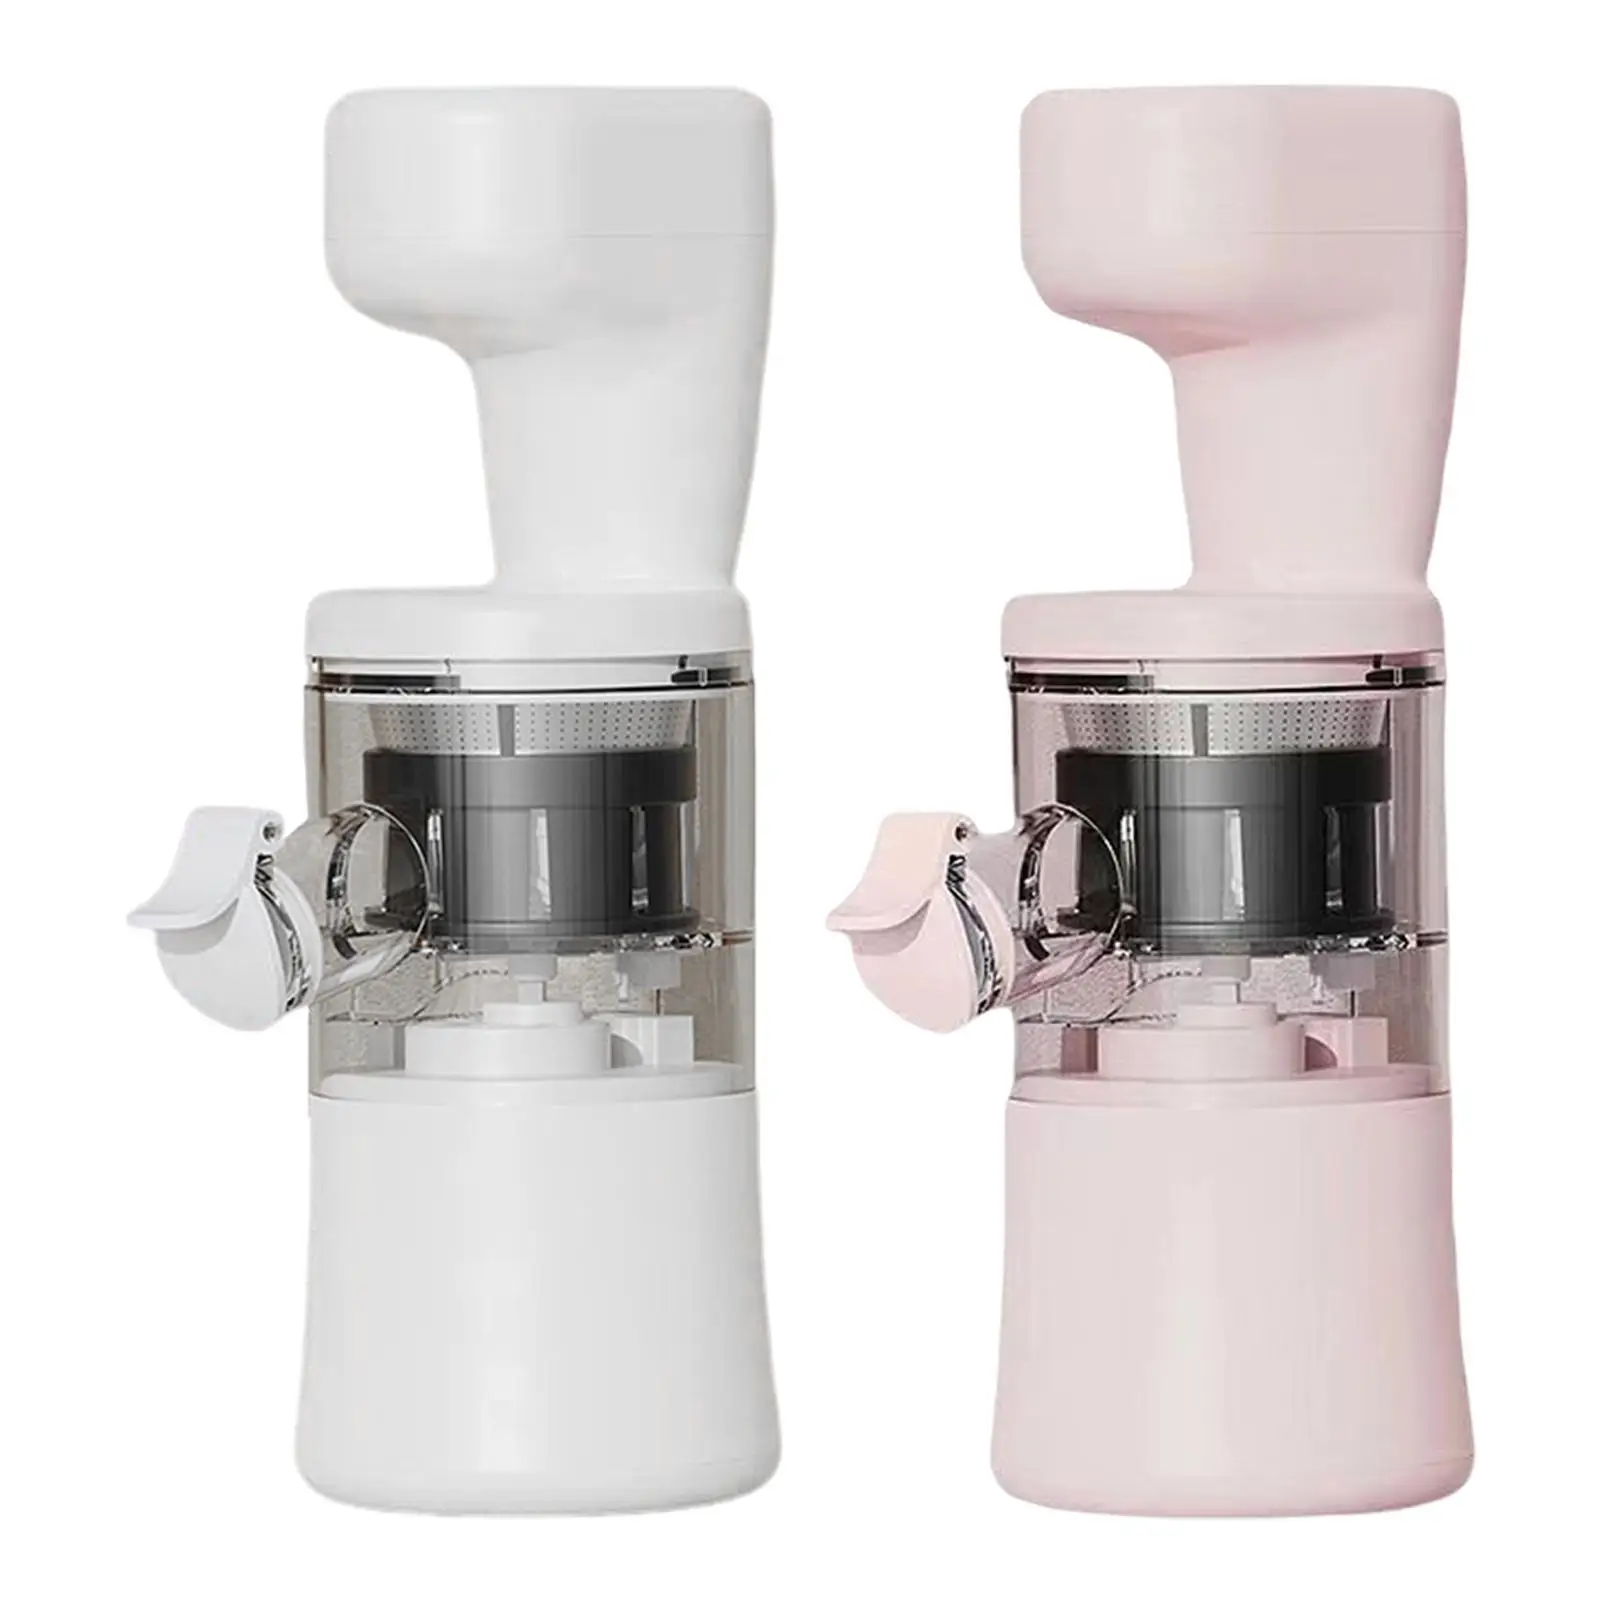 Portable Blender Electric USB Rechargeable Juicer Machine for Shakes and Smoothies